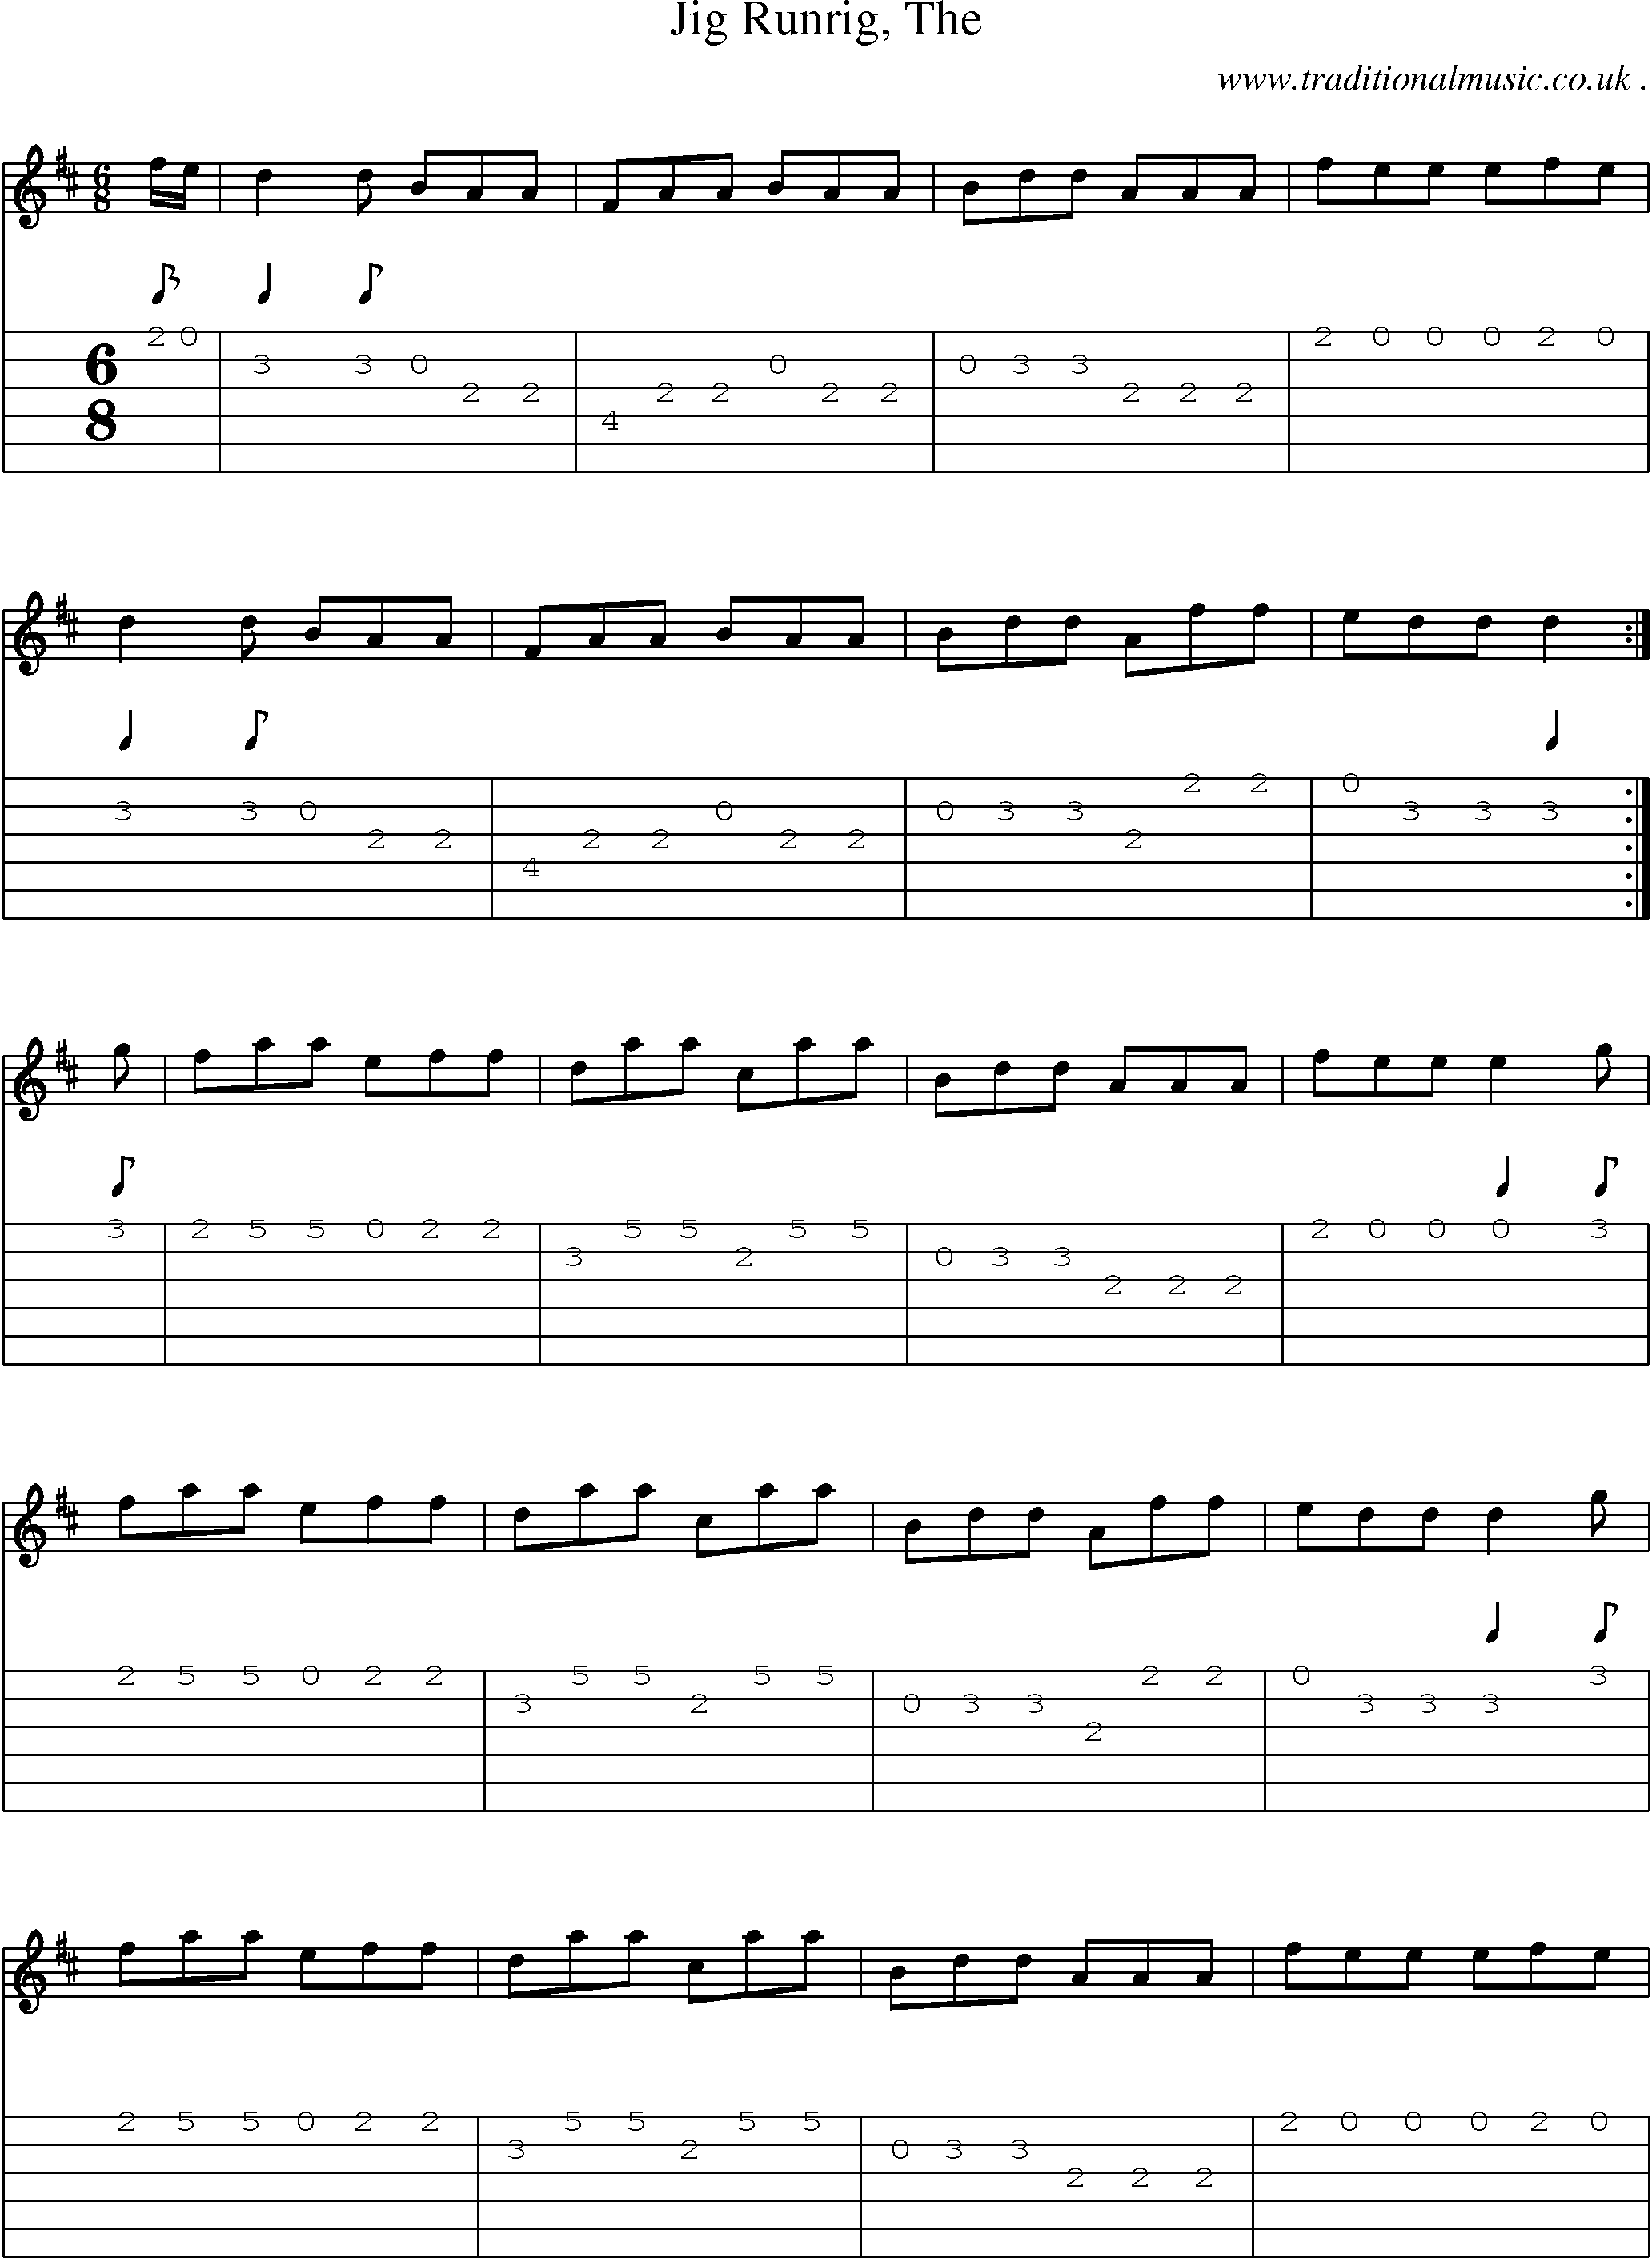 Sheet-music  score, Chords and Guitar Tabs for Jig Runrig The